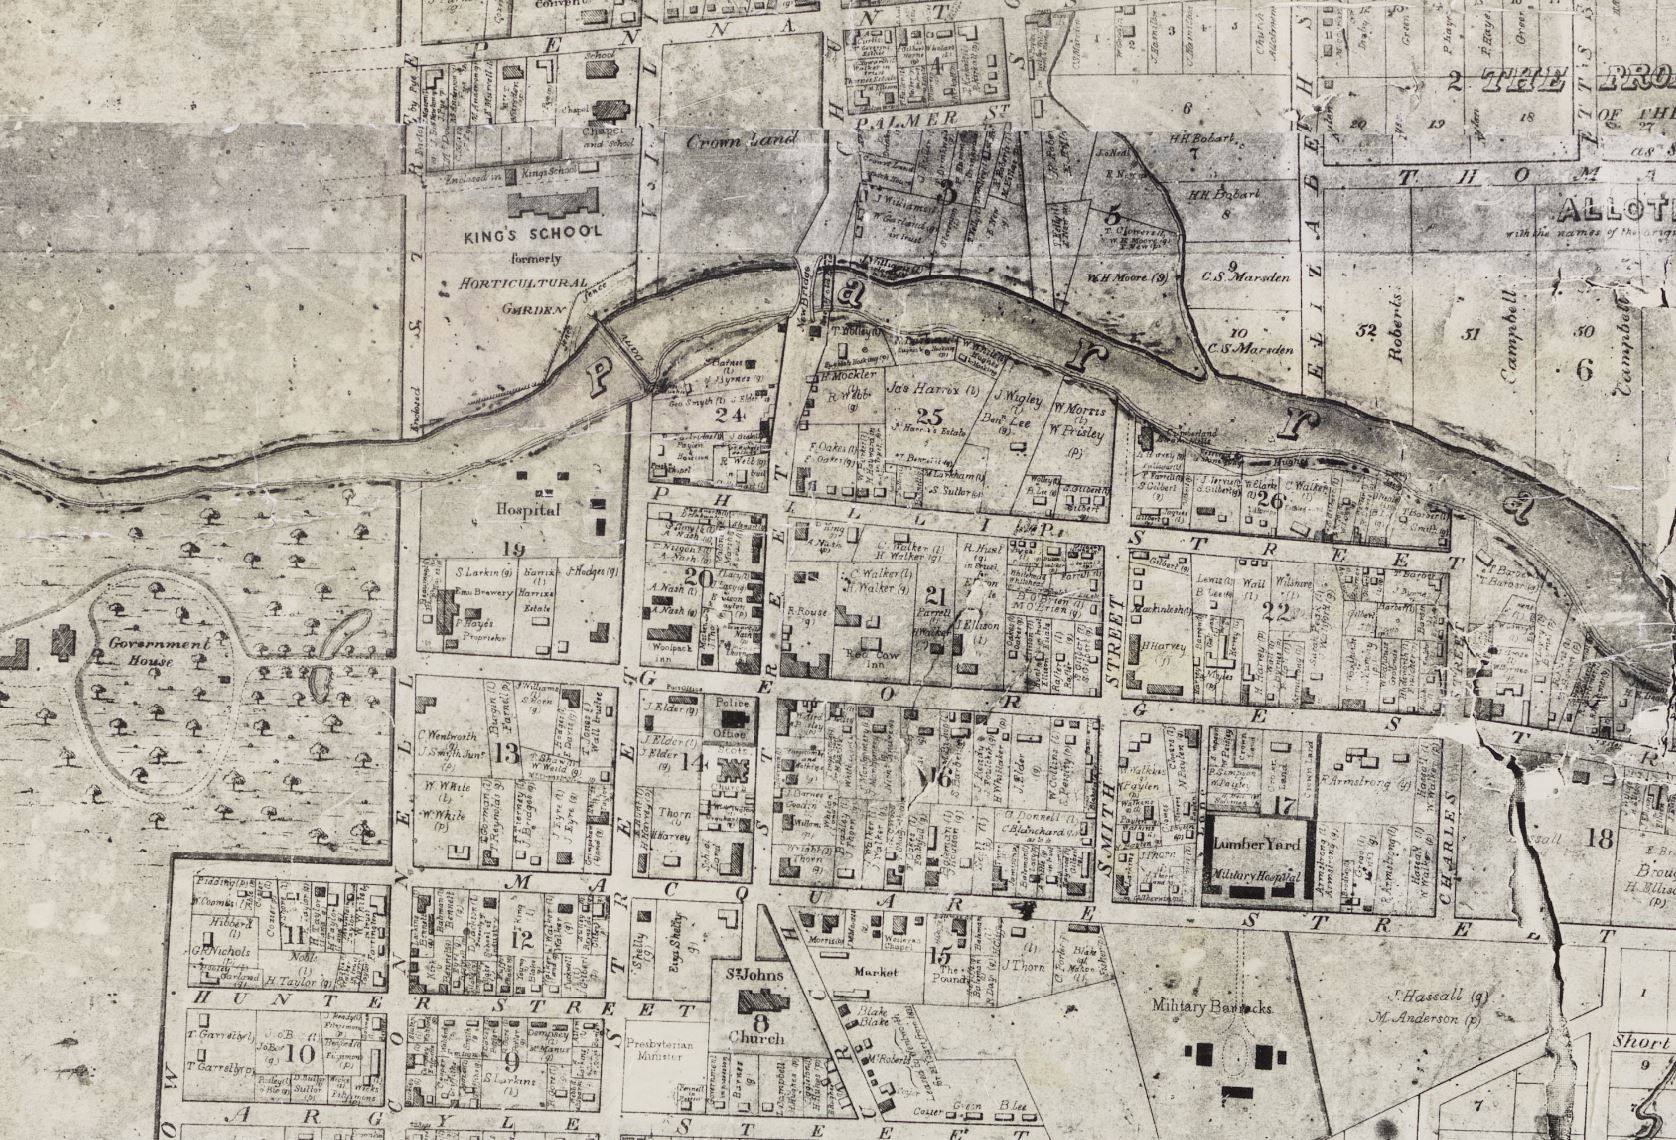 Brownrigg, William Meadows. (1844). Plan of the Town of Parramatta and the adjacent properties, State Library of New South Wales, M4 811.1301/1844/1; FL3690457. 